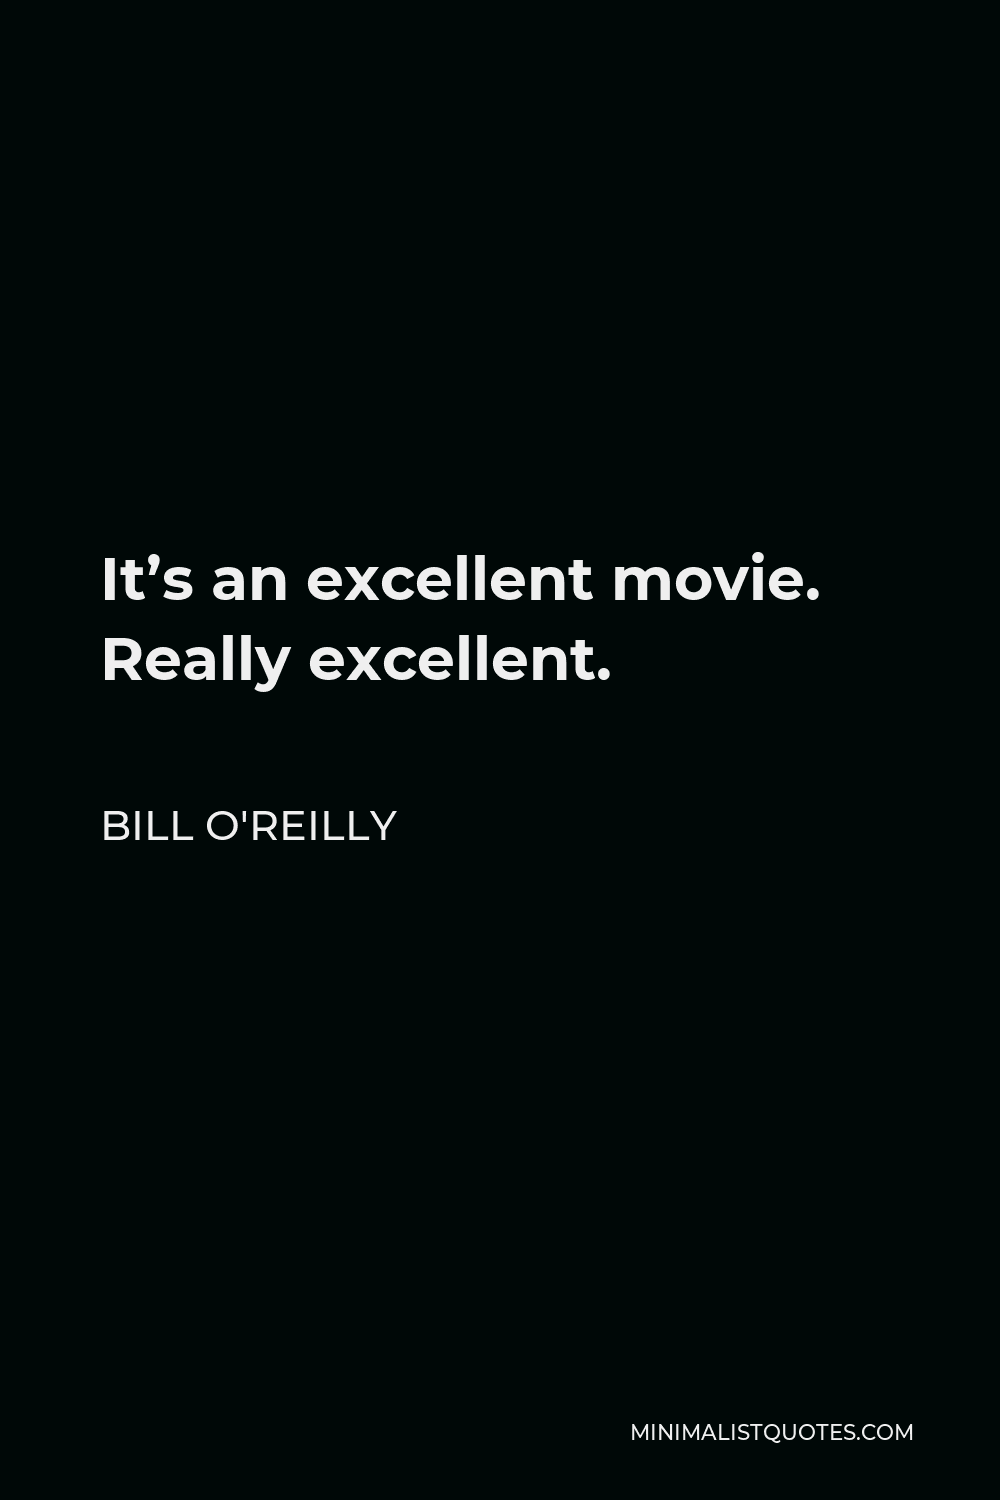 Bill O'Reilly Quote - It’s an excellent movie. Really excellent.